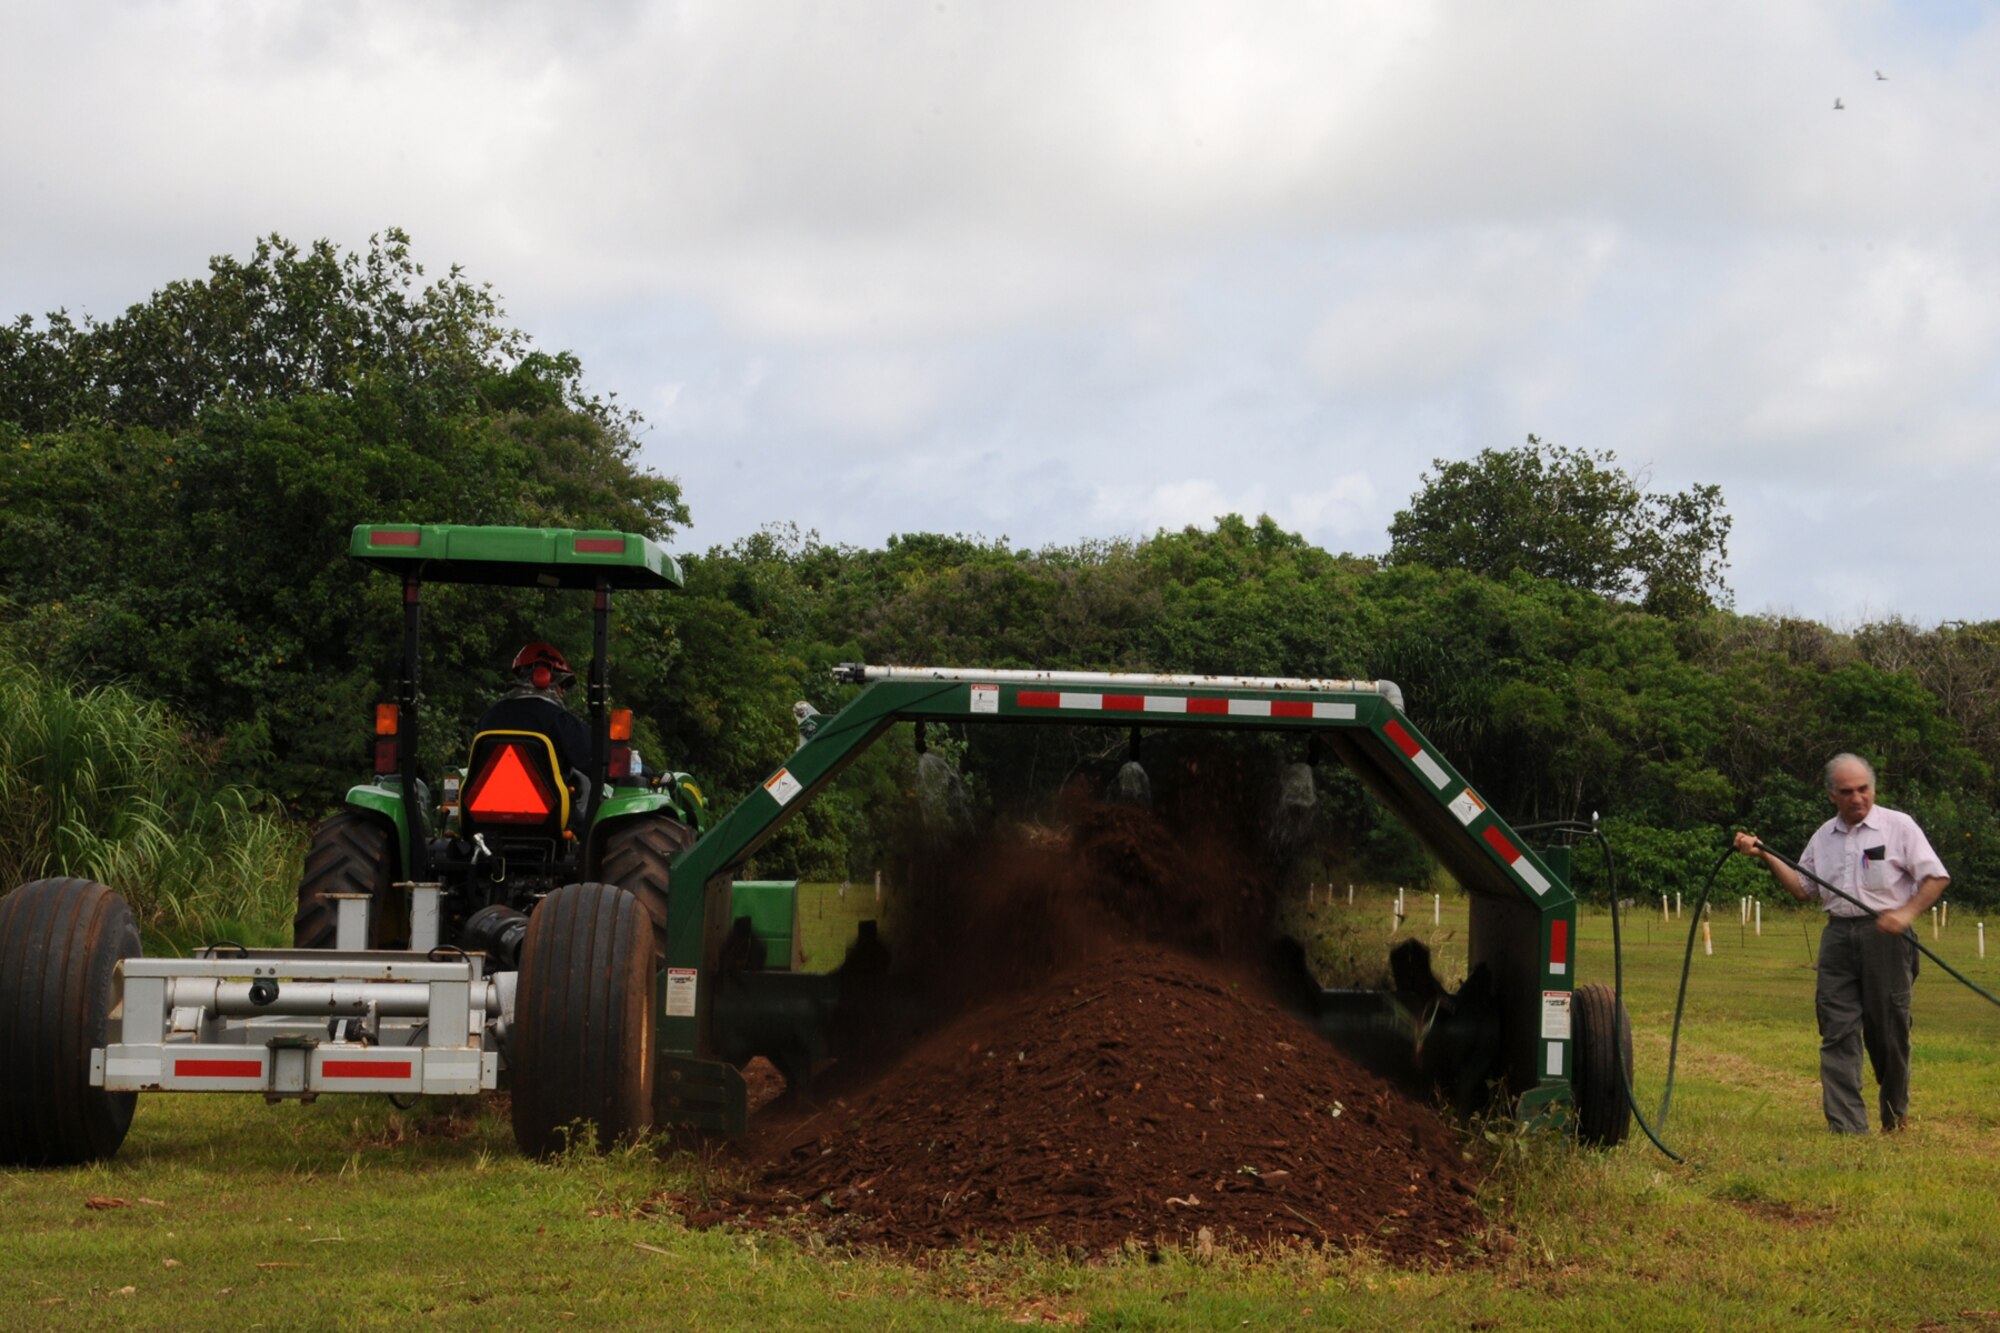 Mohammad Golabi, University of Guam associate professor of soil and environmental sciences, and a research technician turn compost June 19, 2013, at the UOG Research Farm in Yigo, Guam. The professor, technicians and students collected nearly 250 cubic yards of mulch from Andersen Air Force Base, Guam, throughout the year for a project that will benefit the local agriculture community. (U.S. Air Force photo by Staff Sgt. Melissa B.  White/Released)